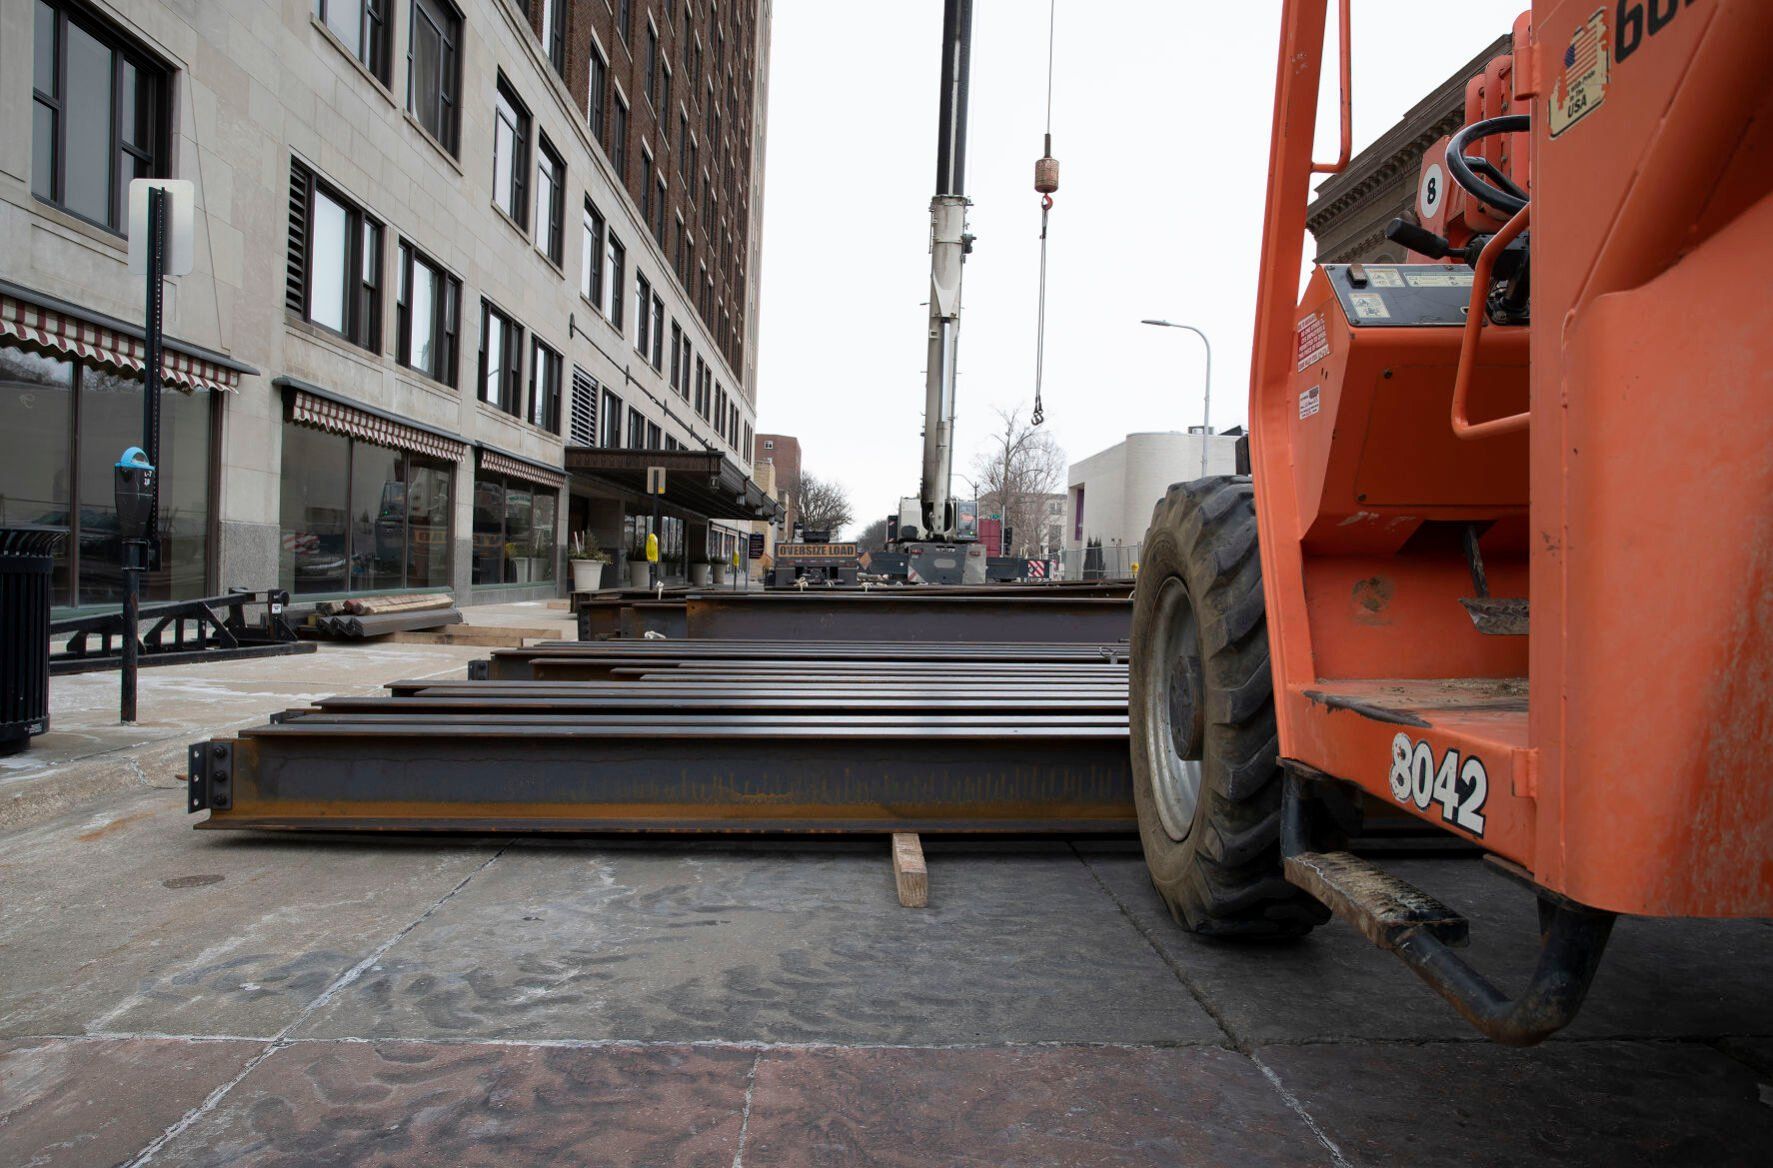 A crane and materials block Locust Street as construction continues on the Roshek Building in Dubuque on Wednesday, Feb. 2, 2022.    PHOTO CREDIT: Stephen Gassman